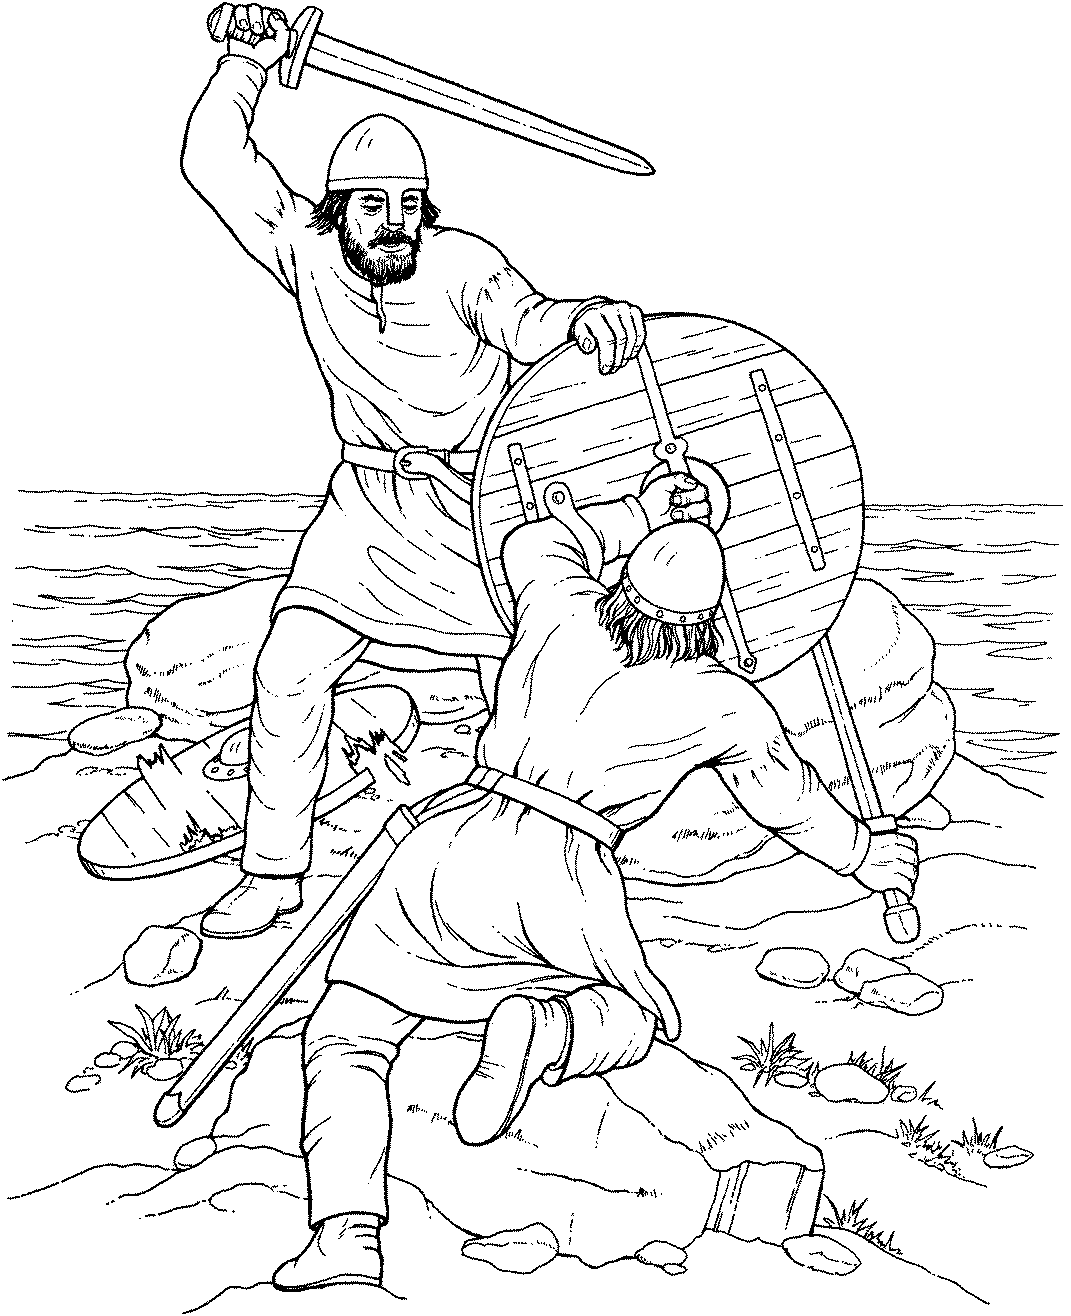 viking coloring page viking coloring pages to download and print for free viking coloring page 